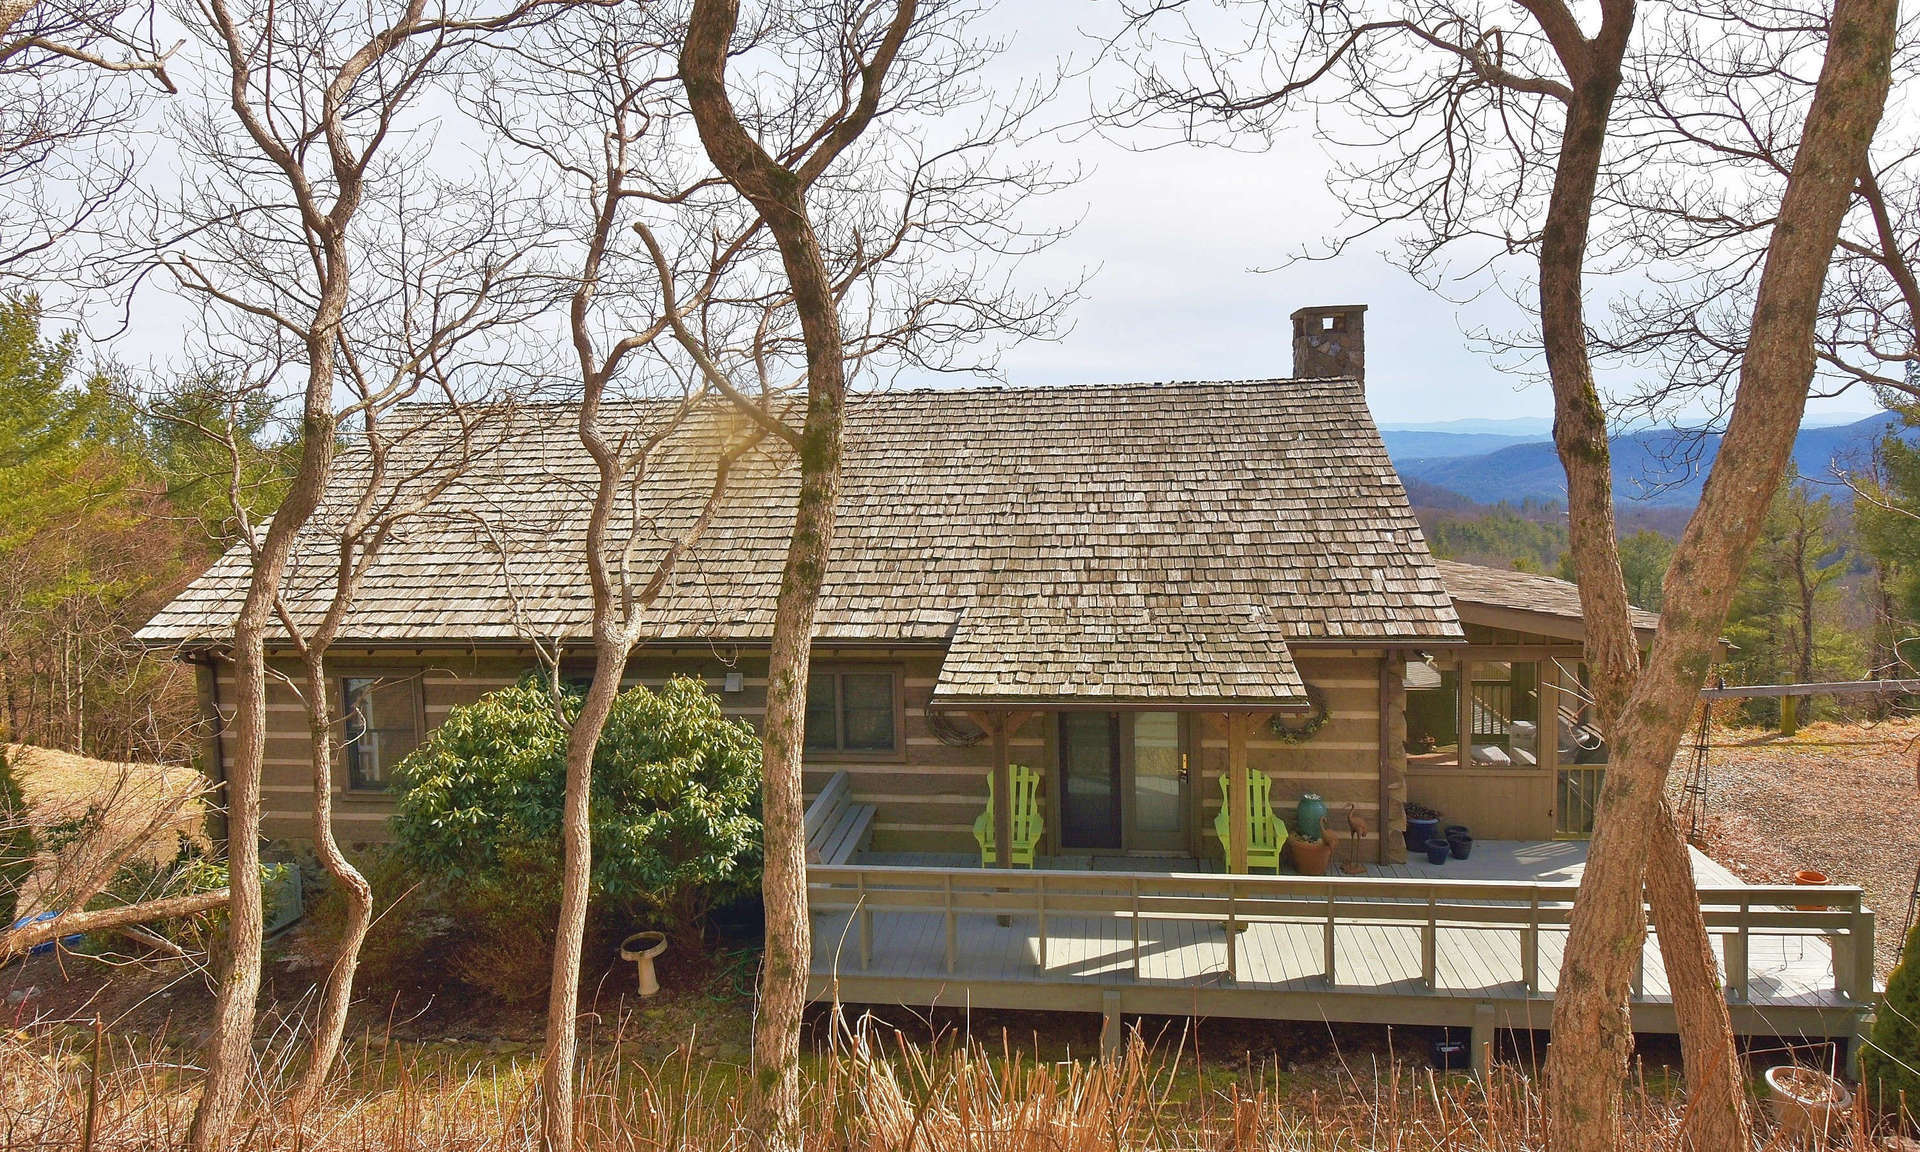 This 2-bedroom, 3-bath log cabin located just off the Blue Ridge Parkway is the ideal place to enjoy Nature's showcase of color  through all four seasons in the  NC High Country.